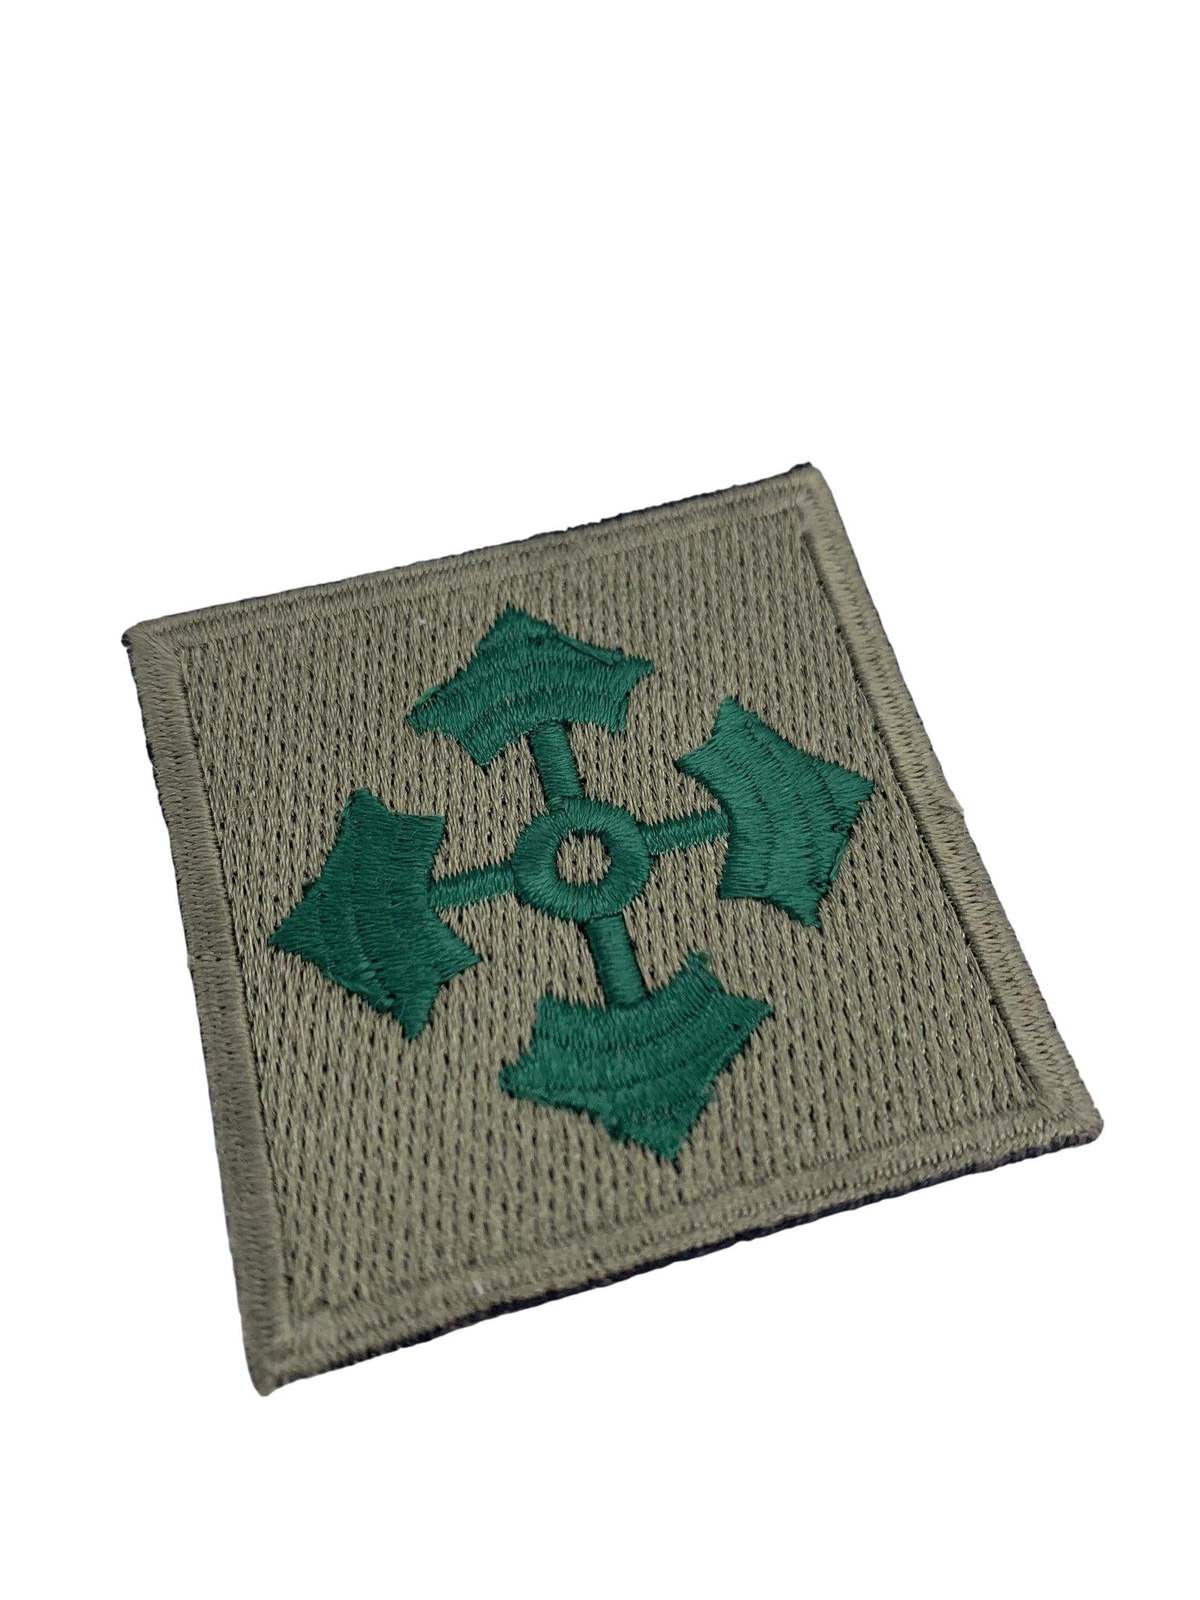 Replica 4th Infantry Division Patch - $6.99